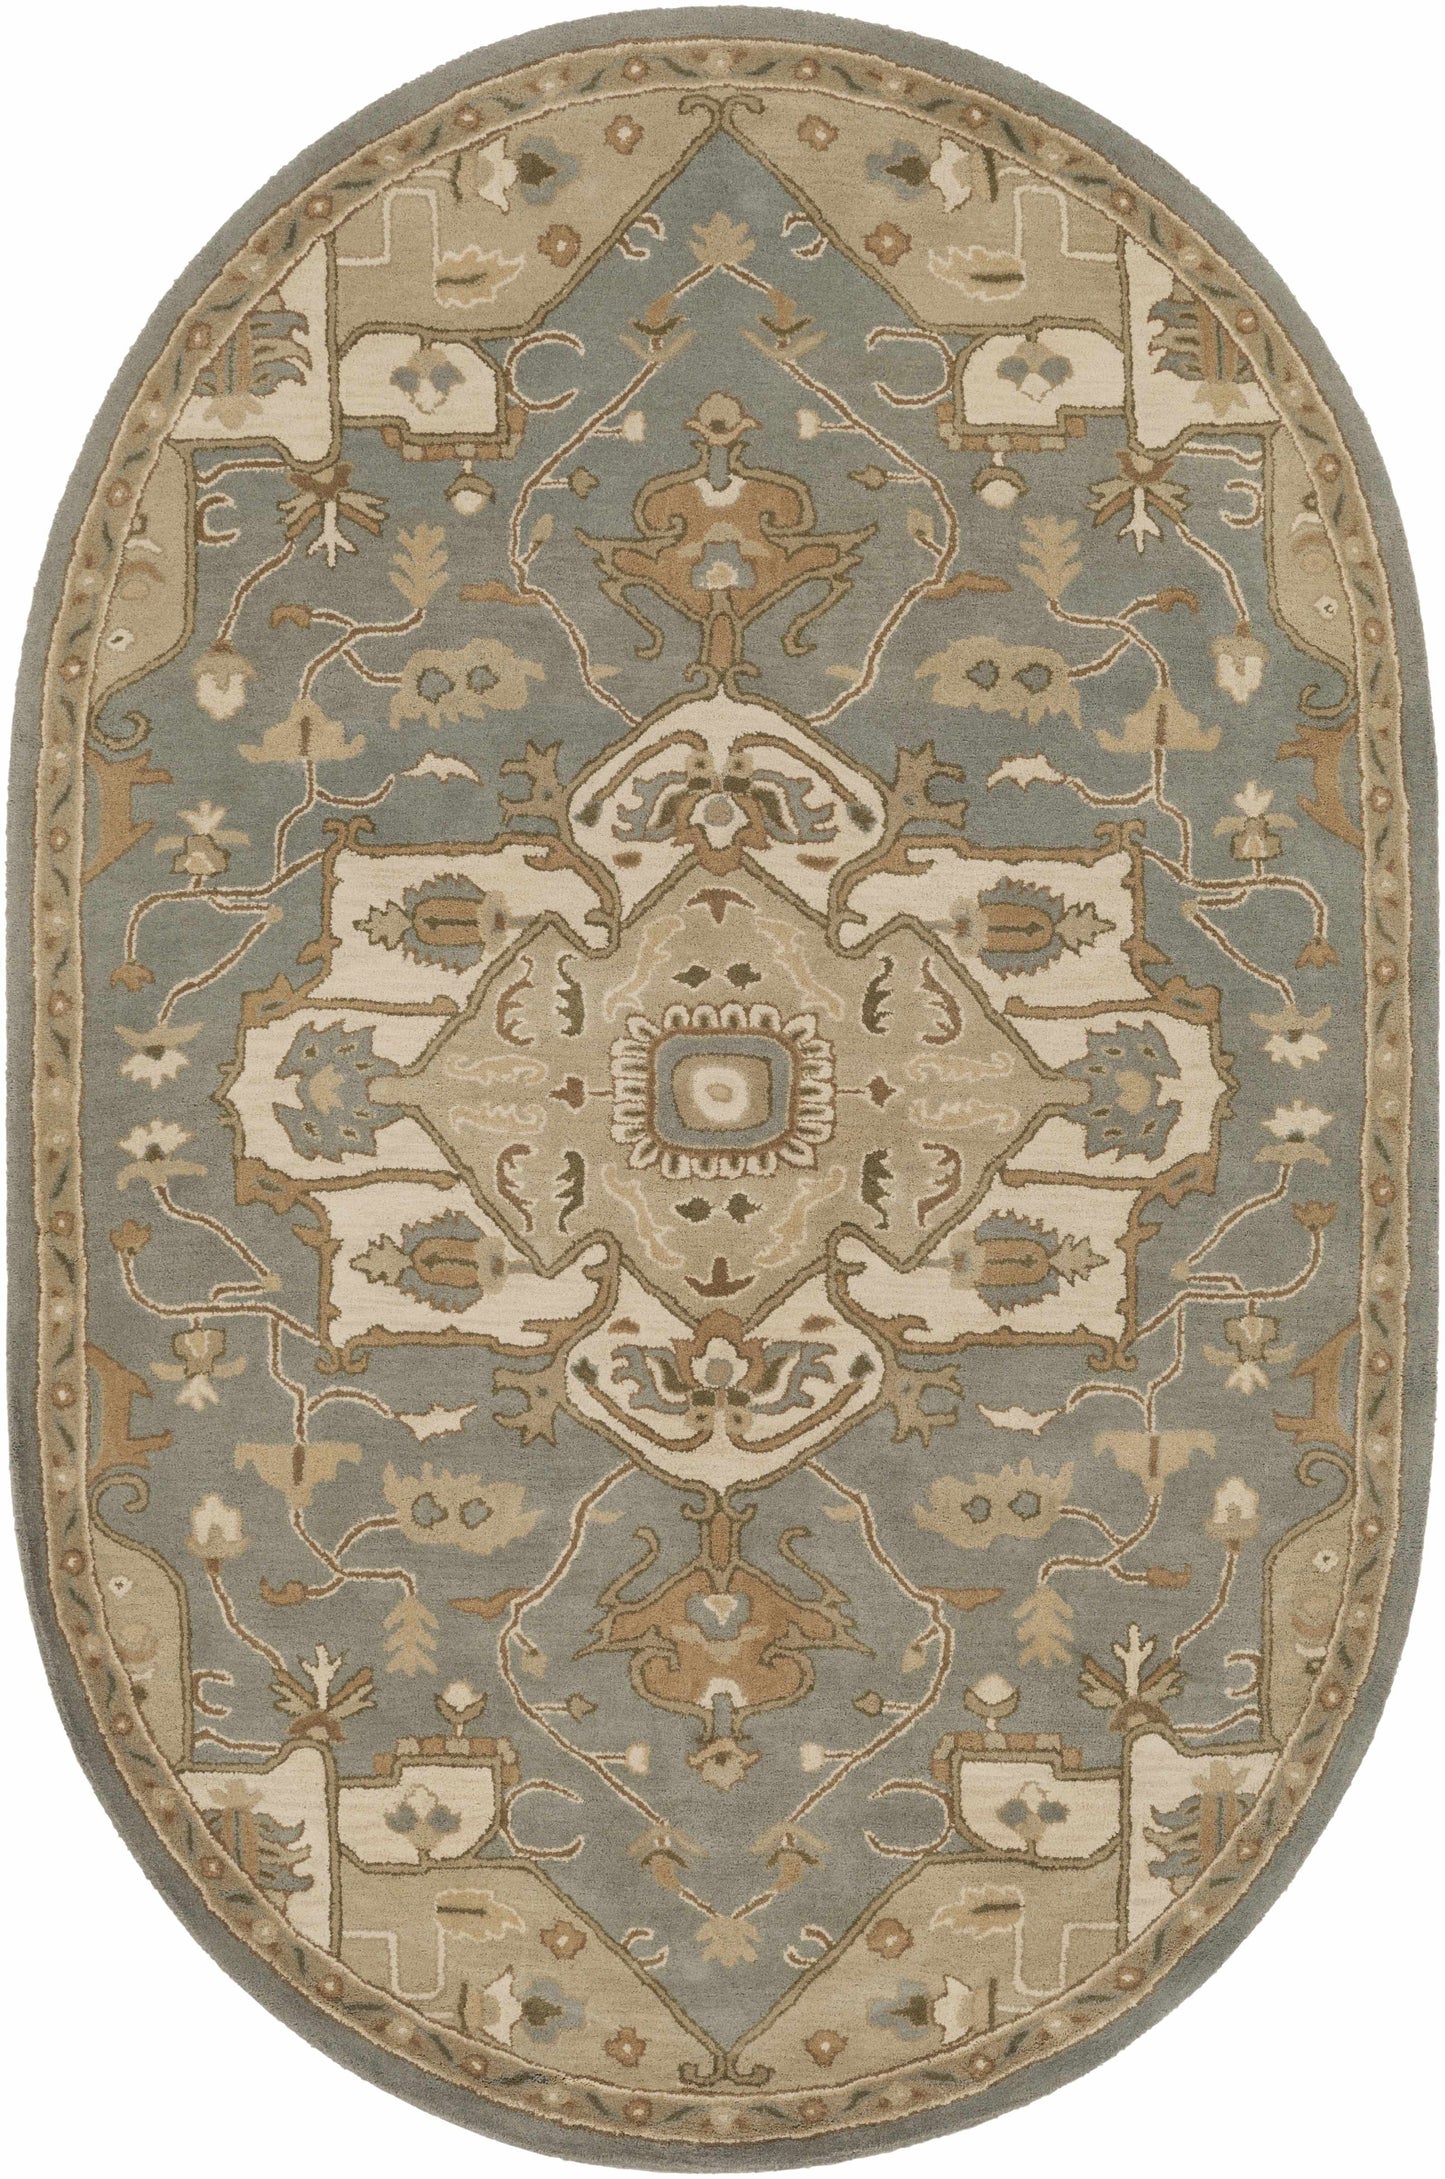 Boutique Rugs Rugs 6' x 9' Oval Broomfield Gray 1144 Wool Area Rug